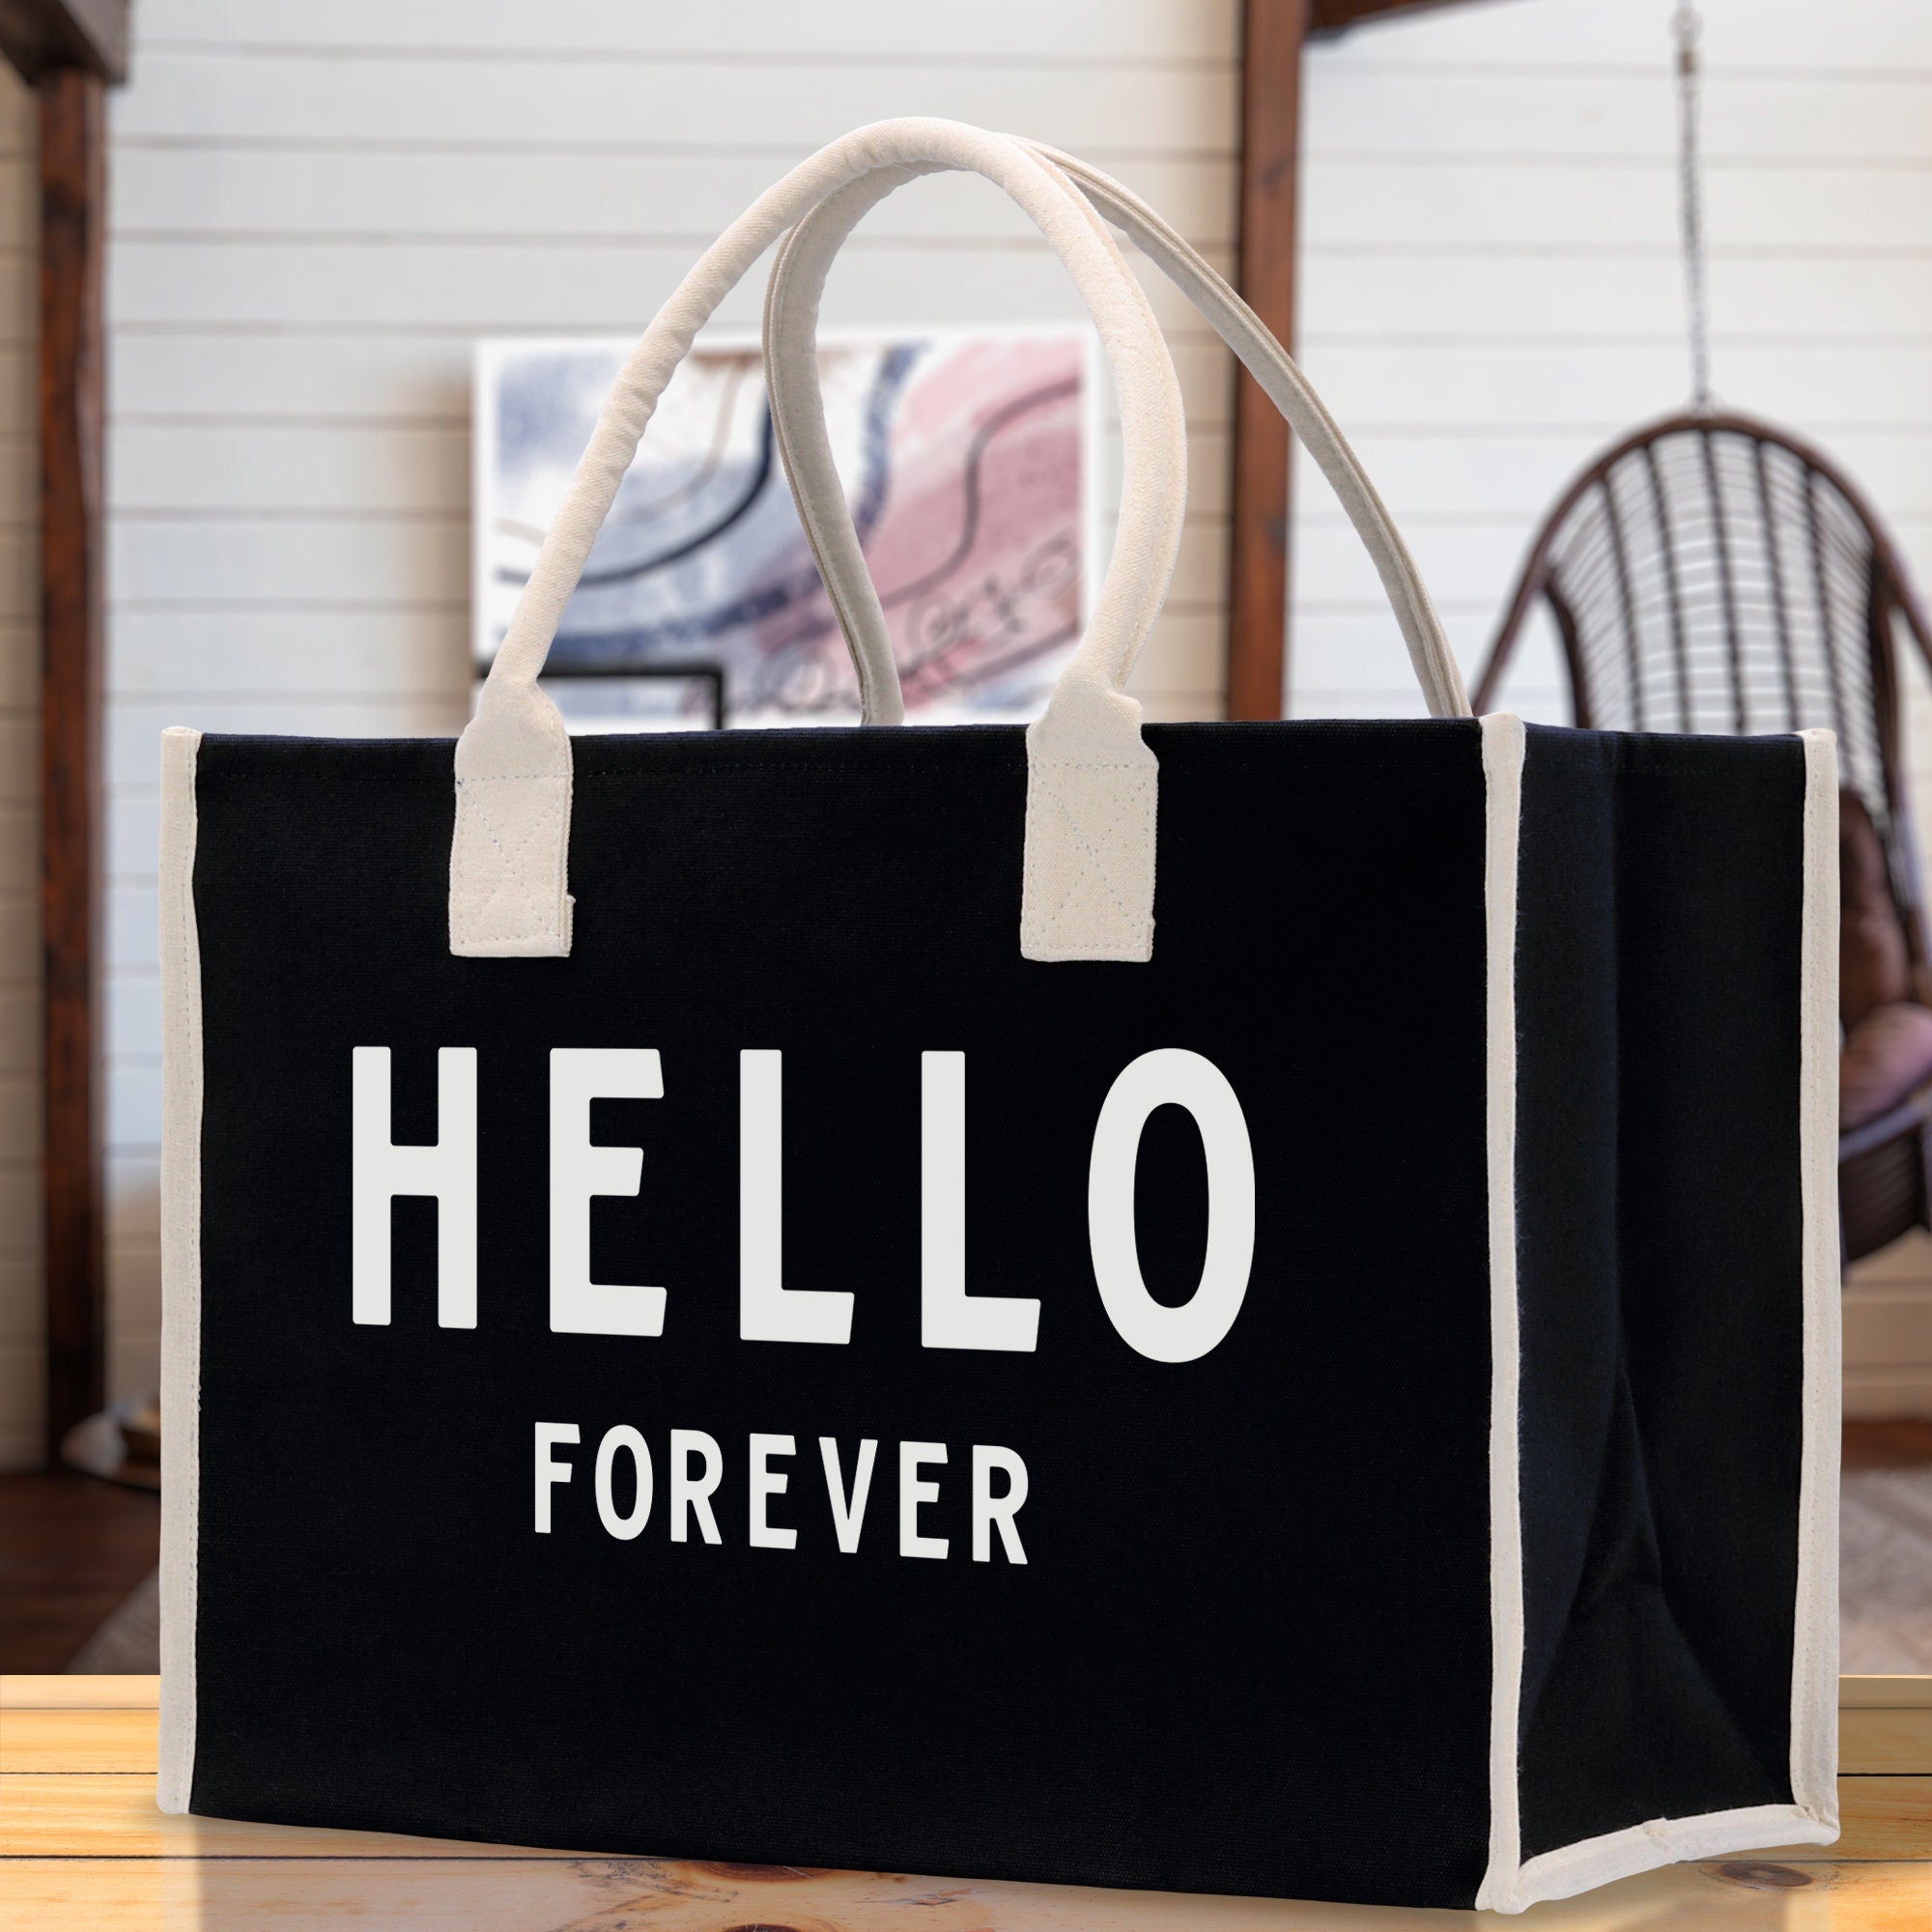 Hello Forever Cotton Canvas Chic Beach Tote Bag Multipurpose Tote Weekender Tote Gift for Her Outdoor Tote Vacation Tote Large Beach Bag